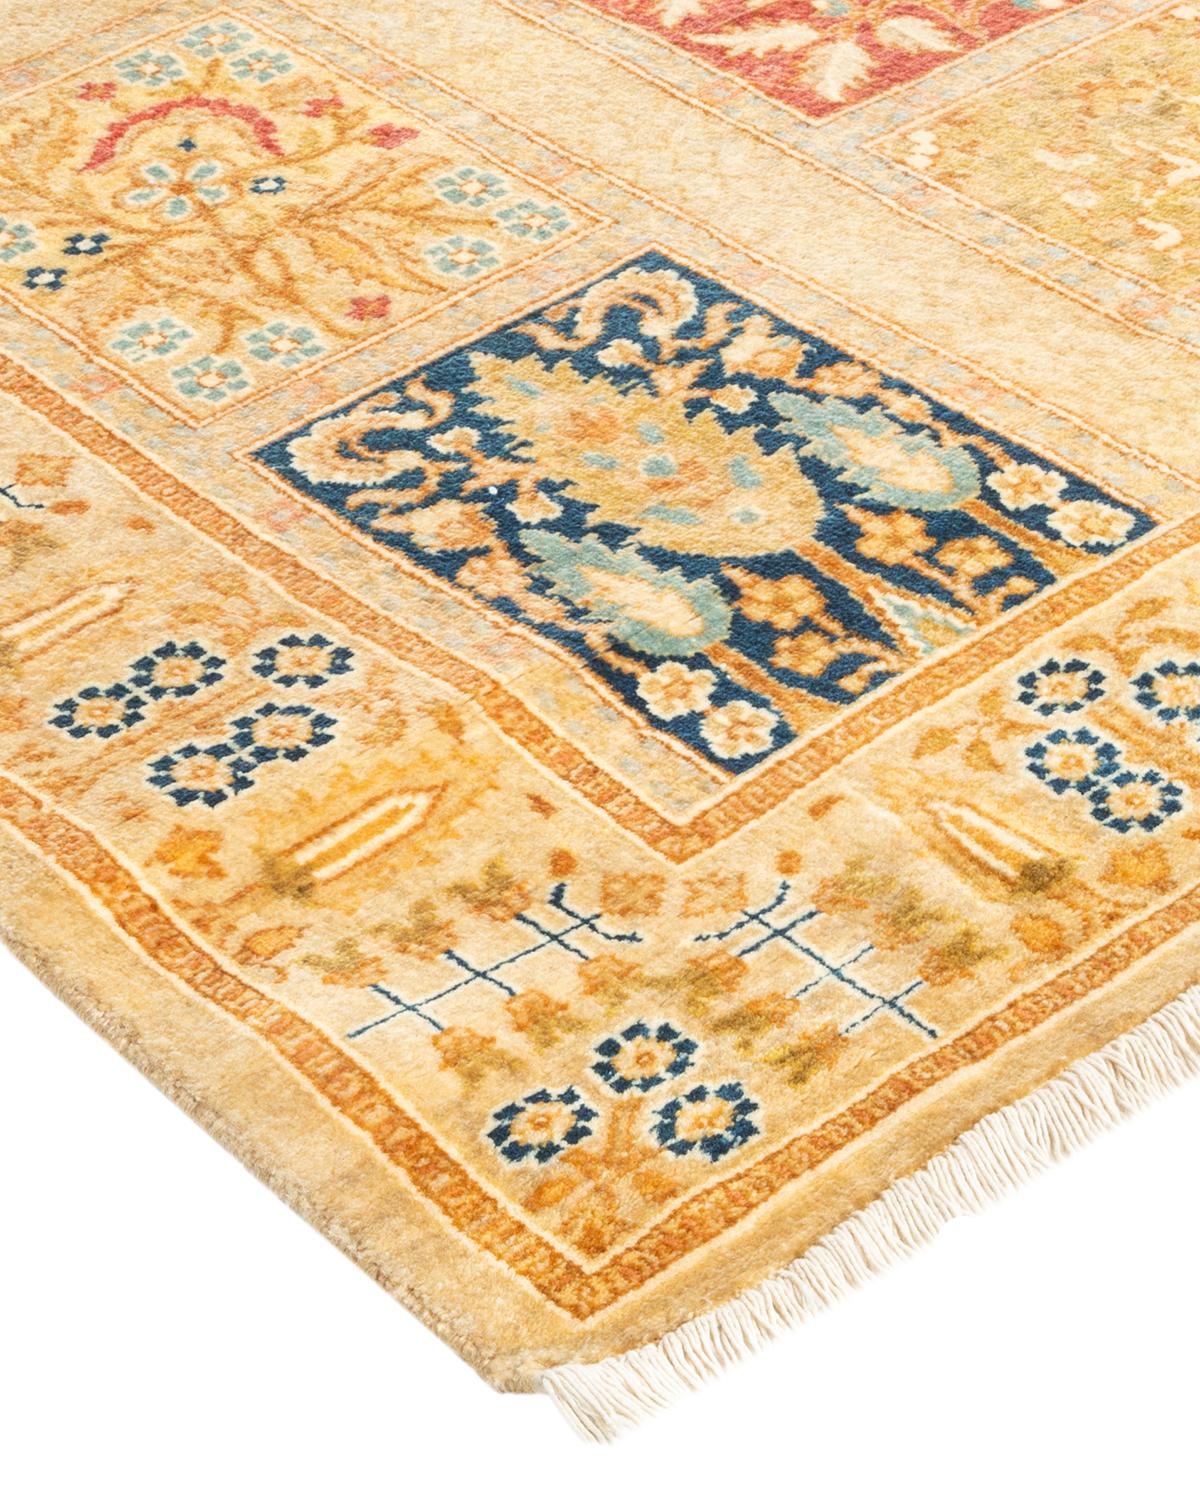 
With understated palettes and allover designs, the rugs in the Mogul Collection will bring timeless sophistication to any room. Influenced by a spectrum of Turkish, Indian, and Persian designs, the artisans who handweave these wool rugs imbue